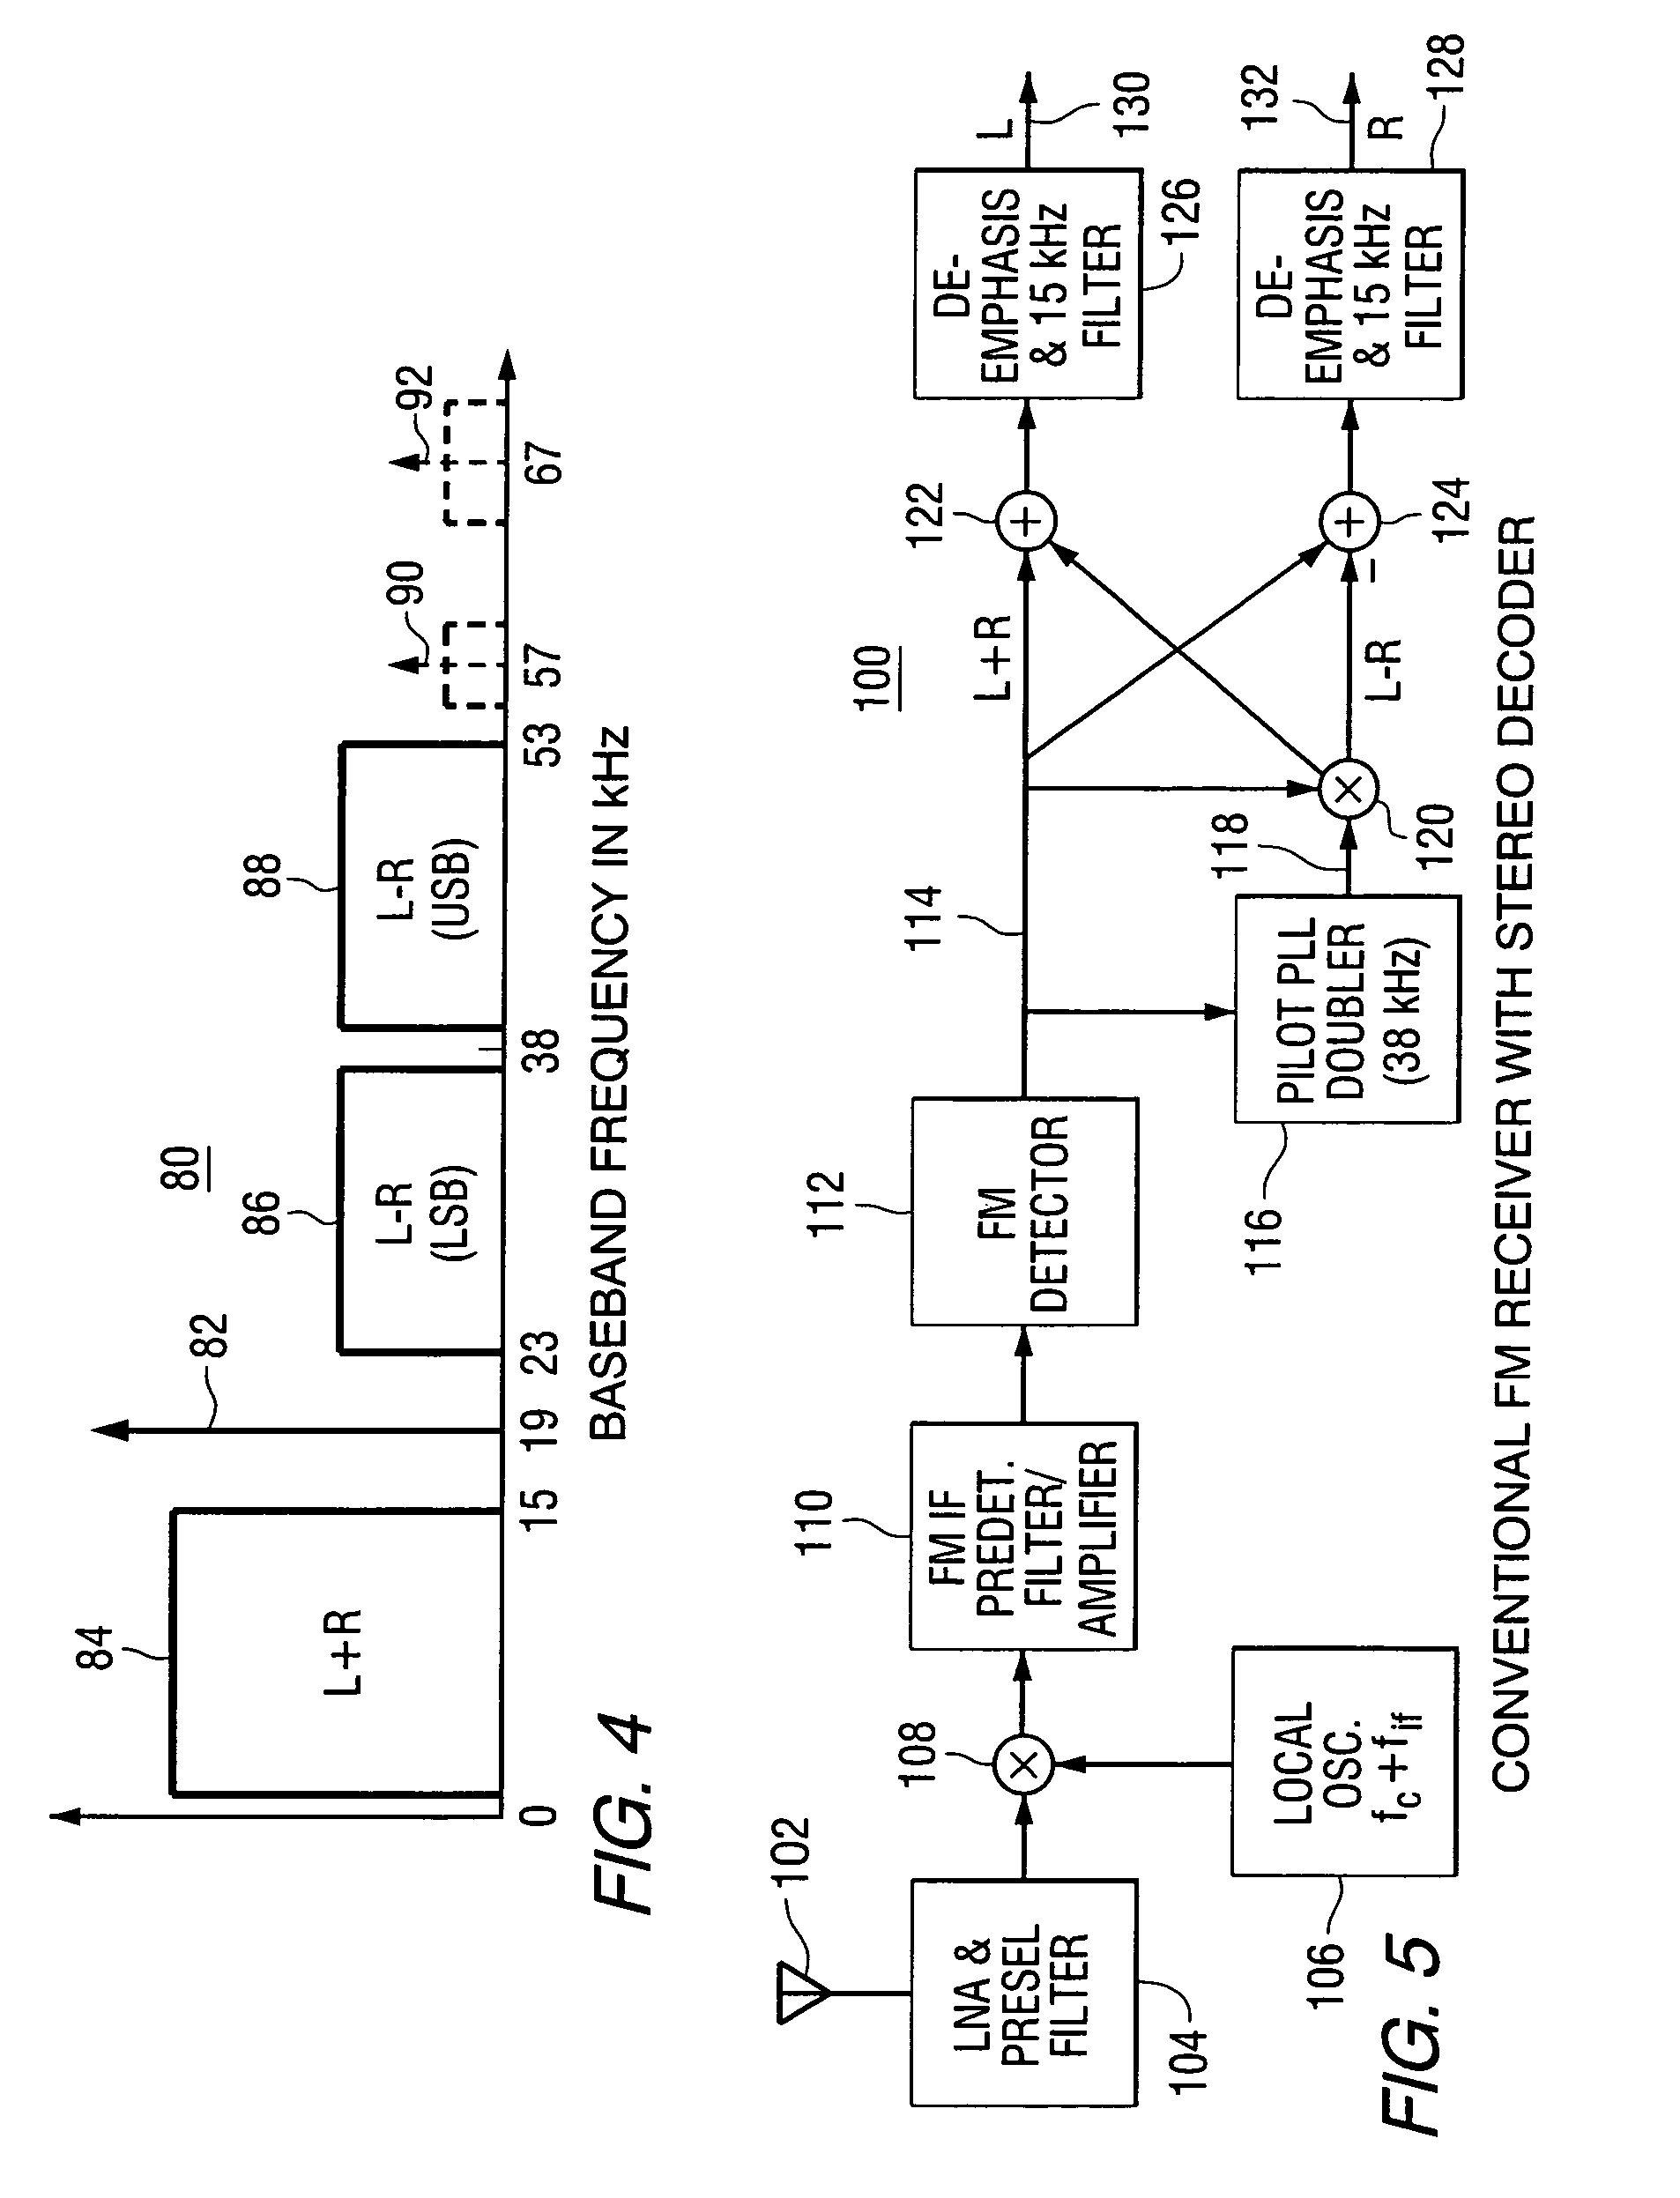 Bandwidth reduction of an FM broadcast signal using a baseband precompensation technique